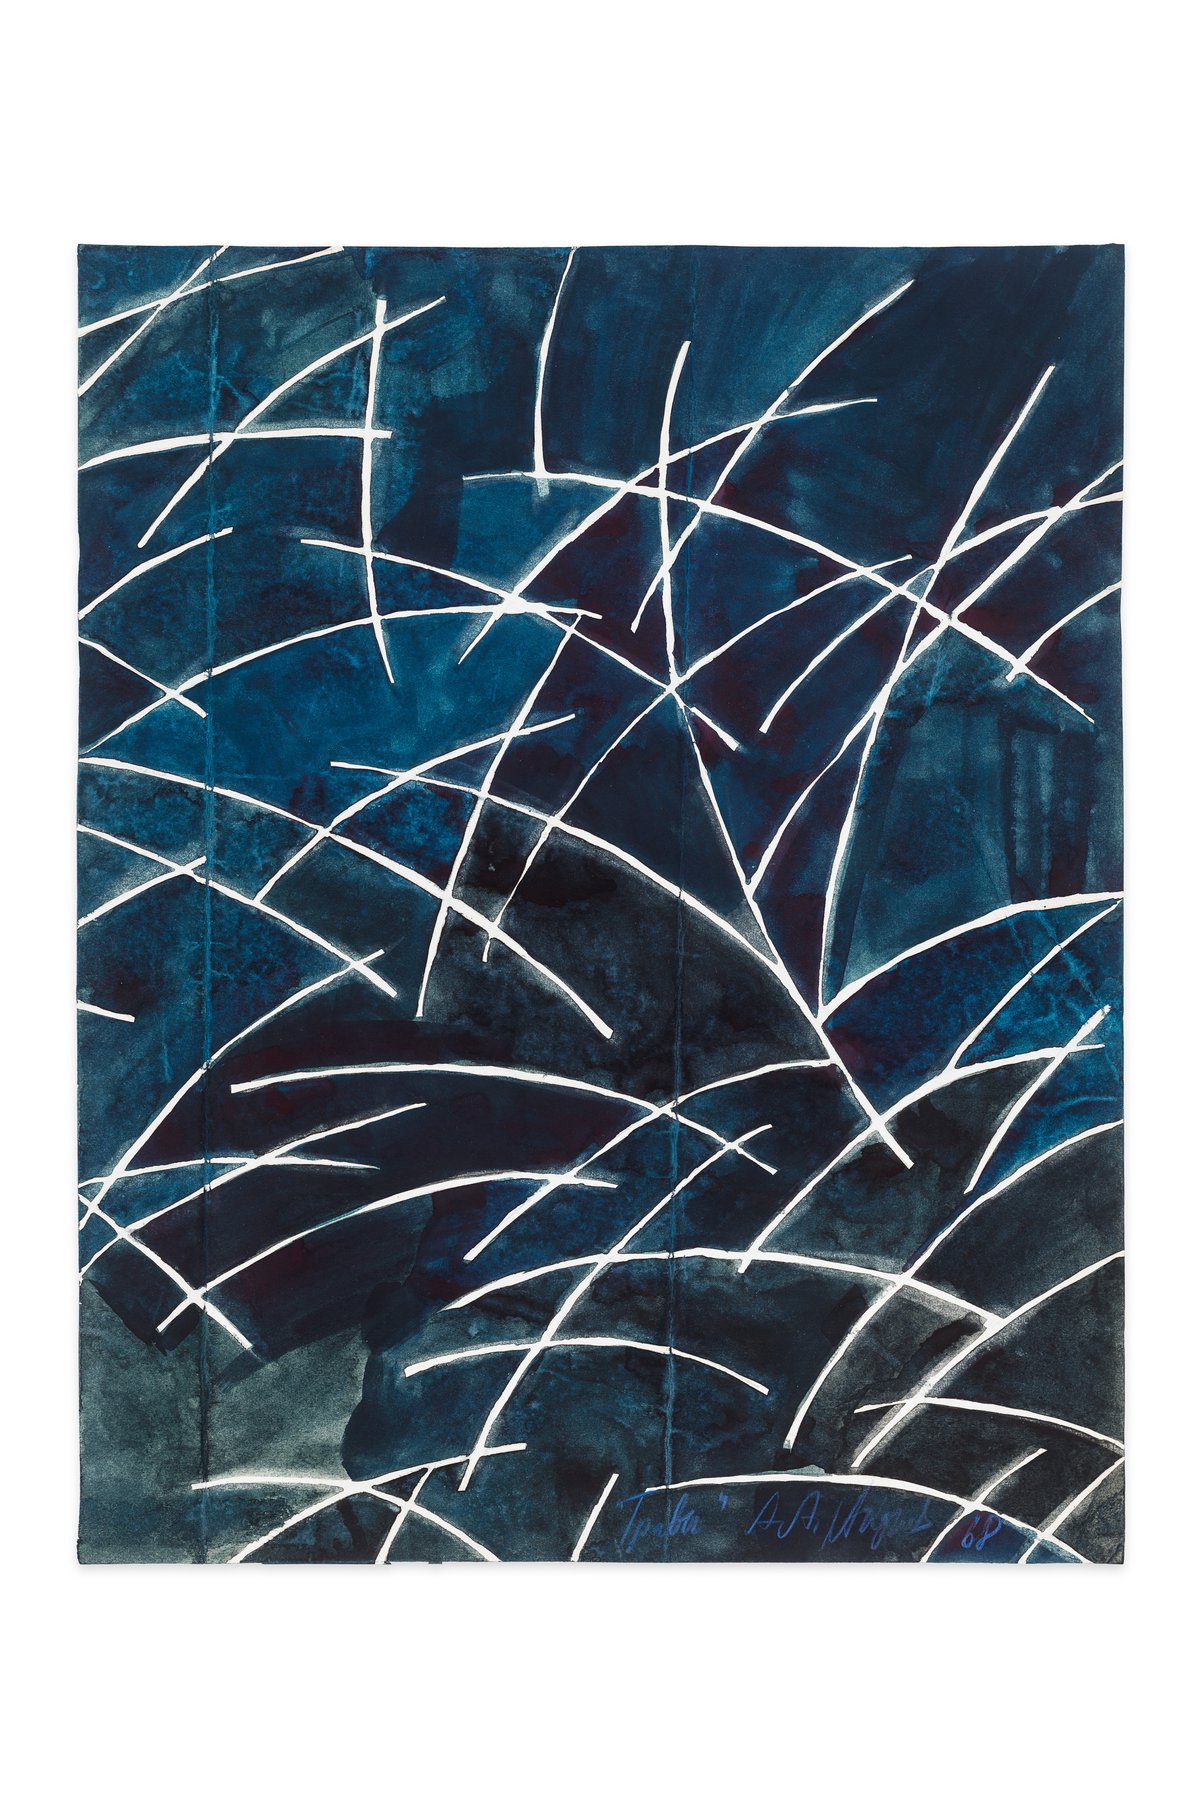 Anna AndreevaThe Herbs, 1968 (recto)Ink, gouache and pencil on paper54,5 x 43 cm